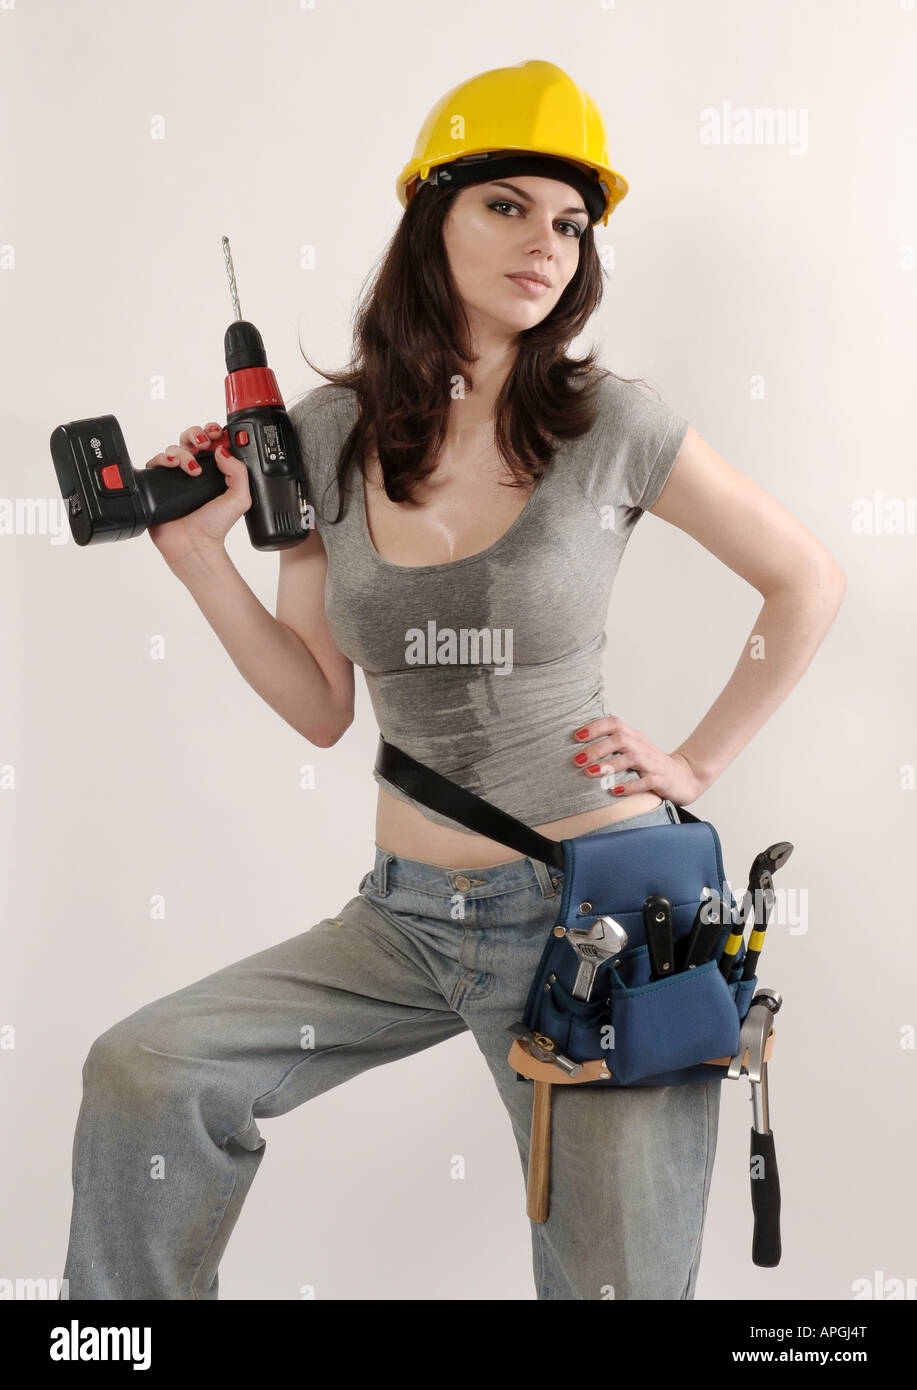 Sexy builder girl holding a drill Stock Photo - Alamy